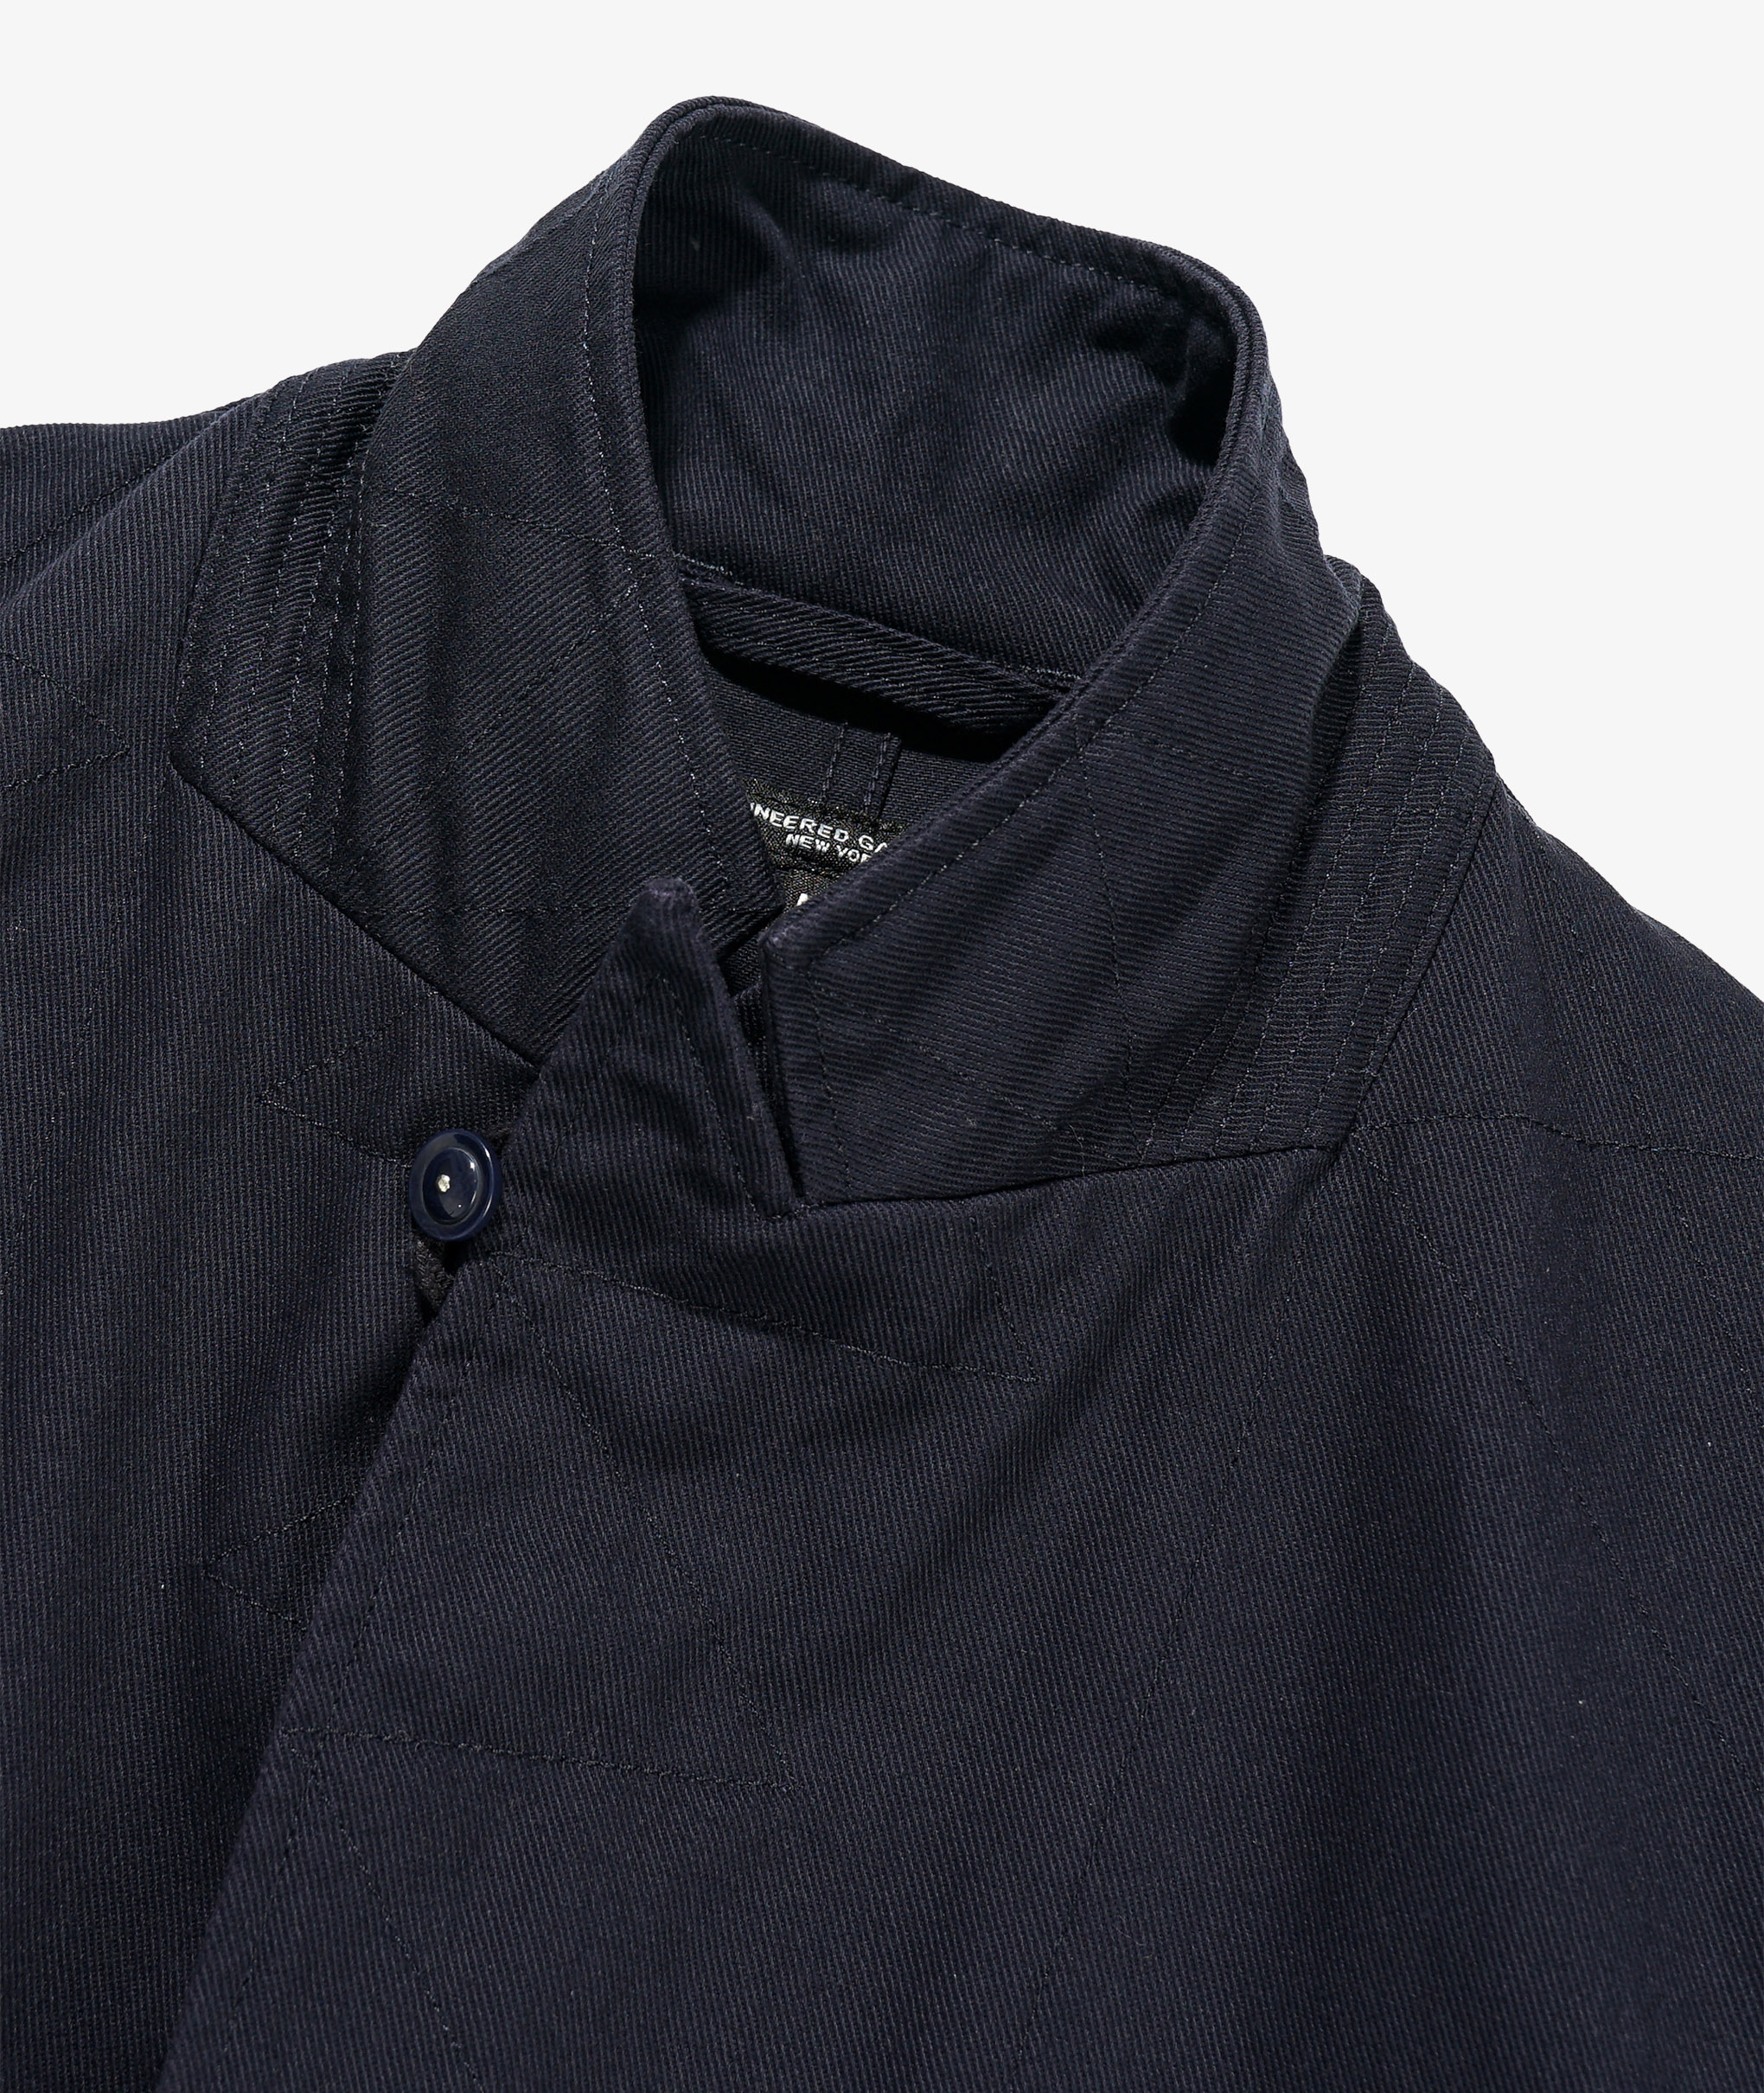 Norse Store | Shipping Worldwide - Engineered Garments Bedford 